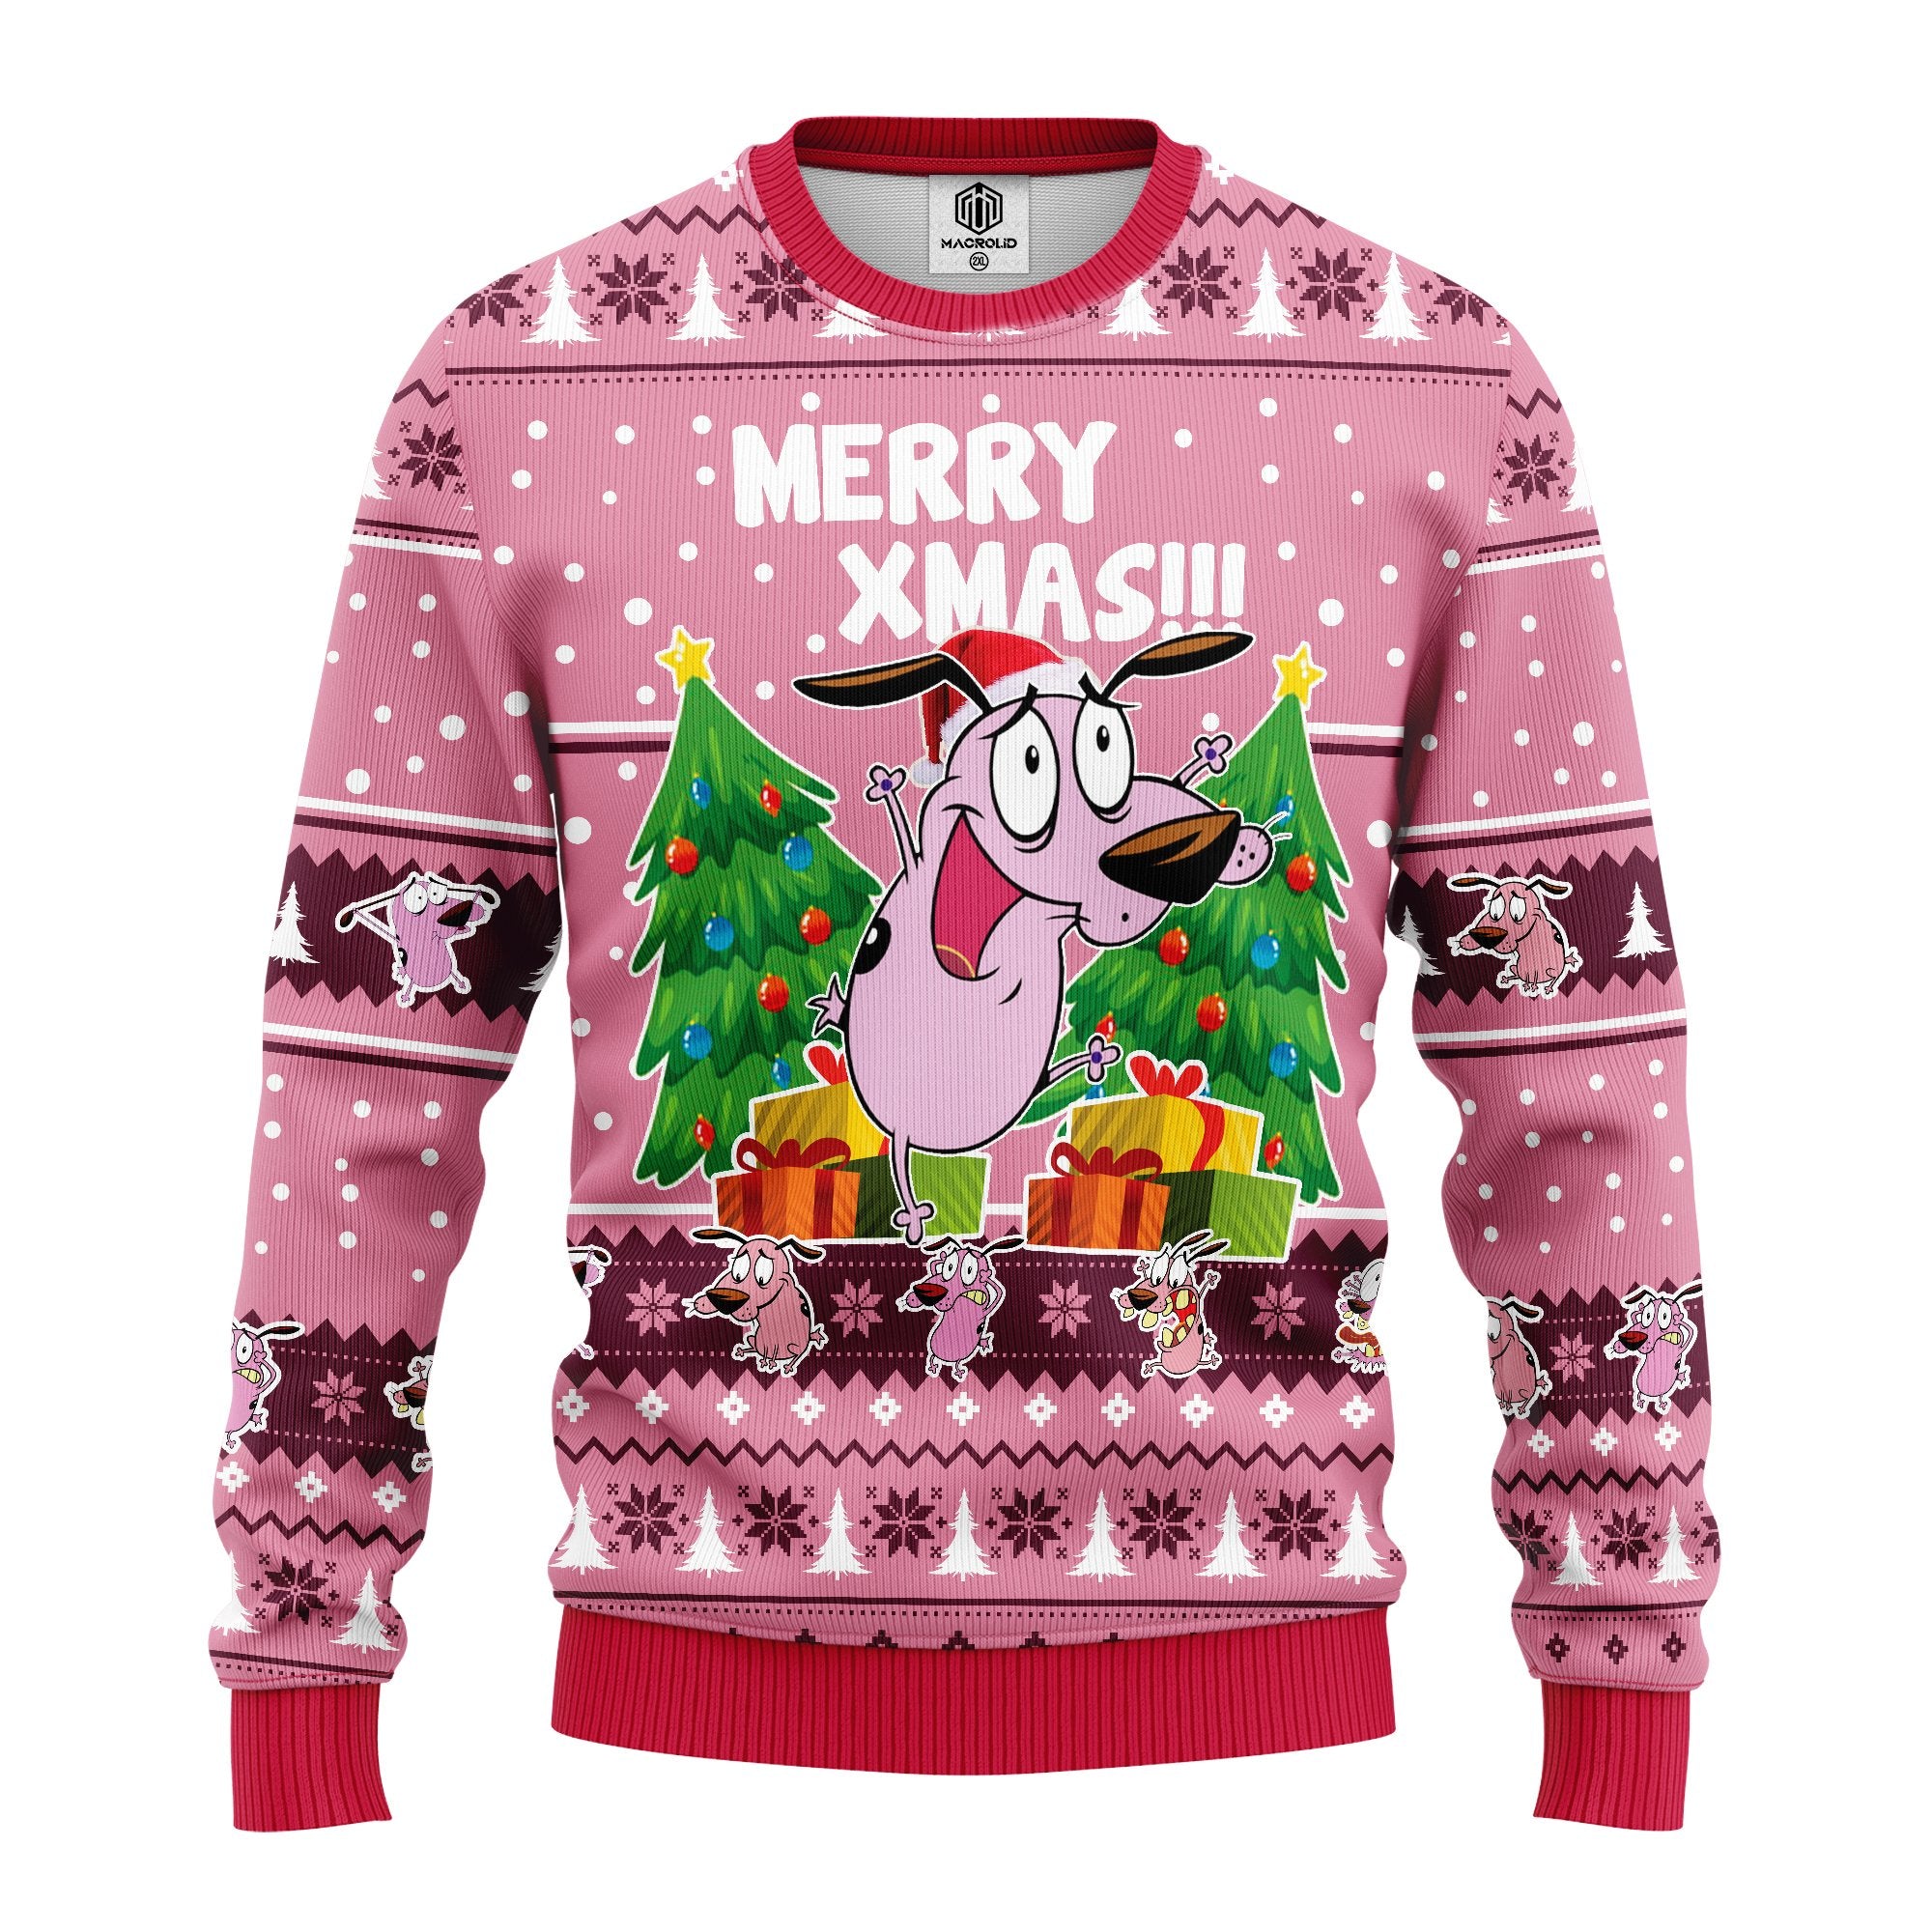 Couage The Cowardly Ugly Christmas Sweater Amazing Gift Idea Thanksgiving Gift